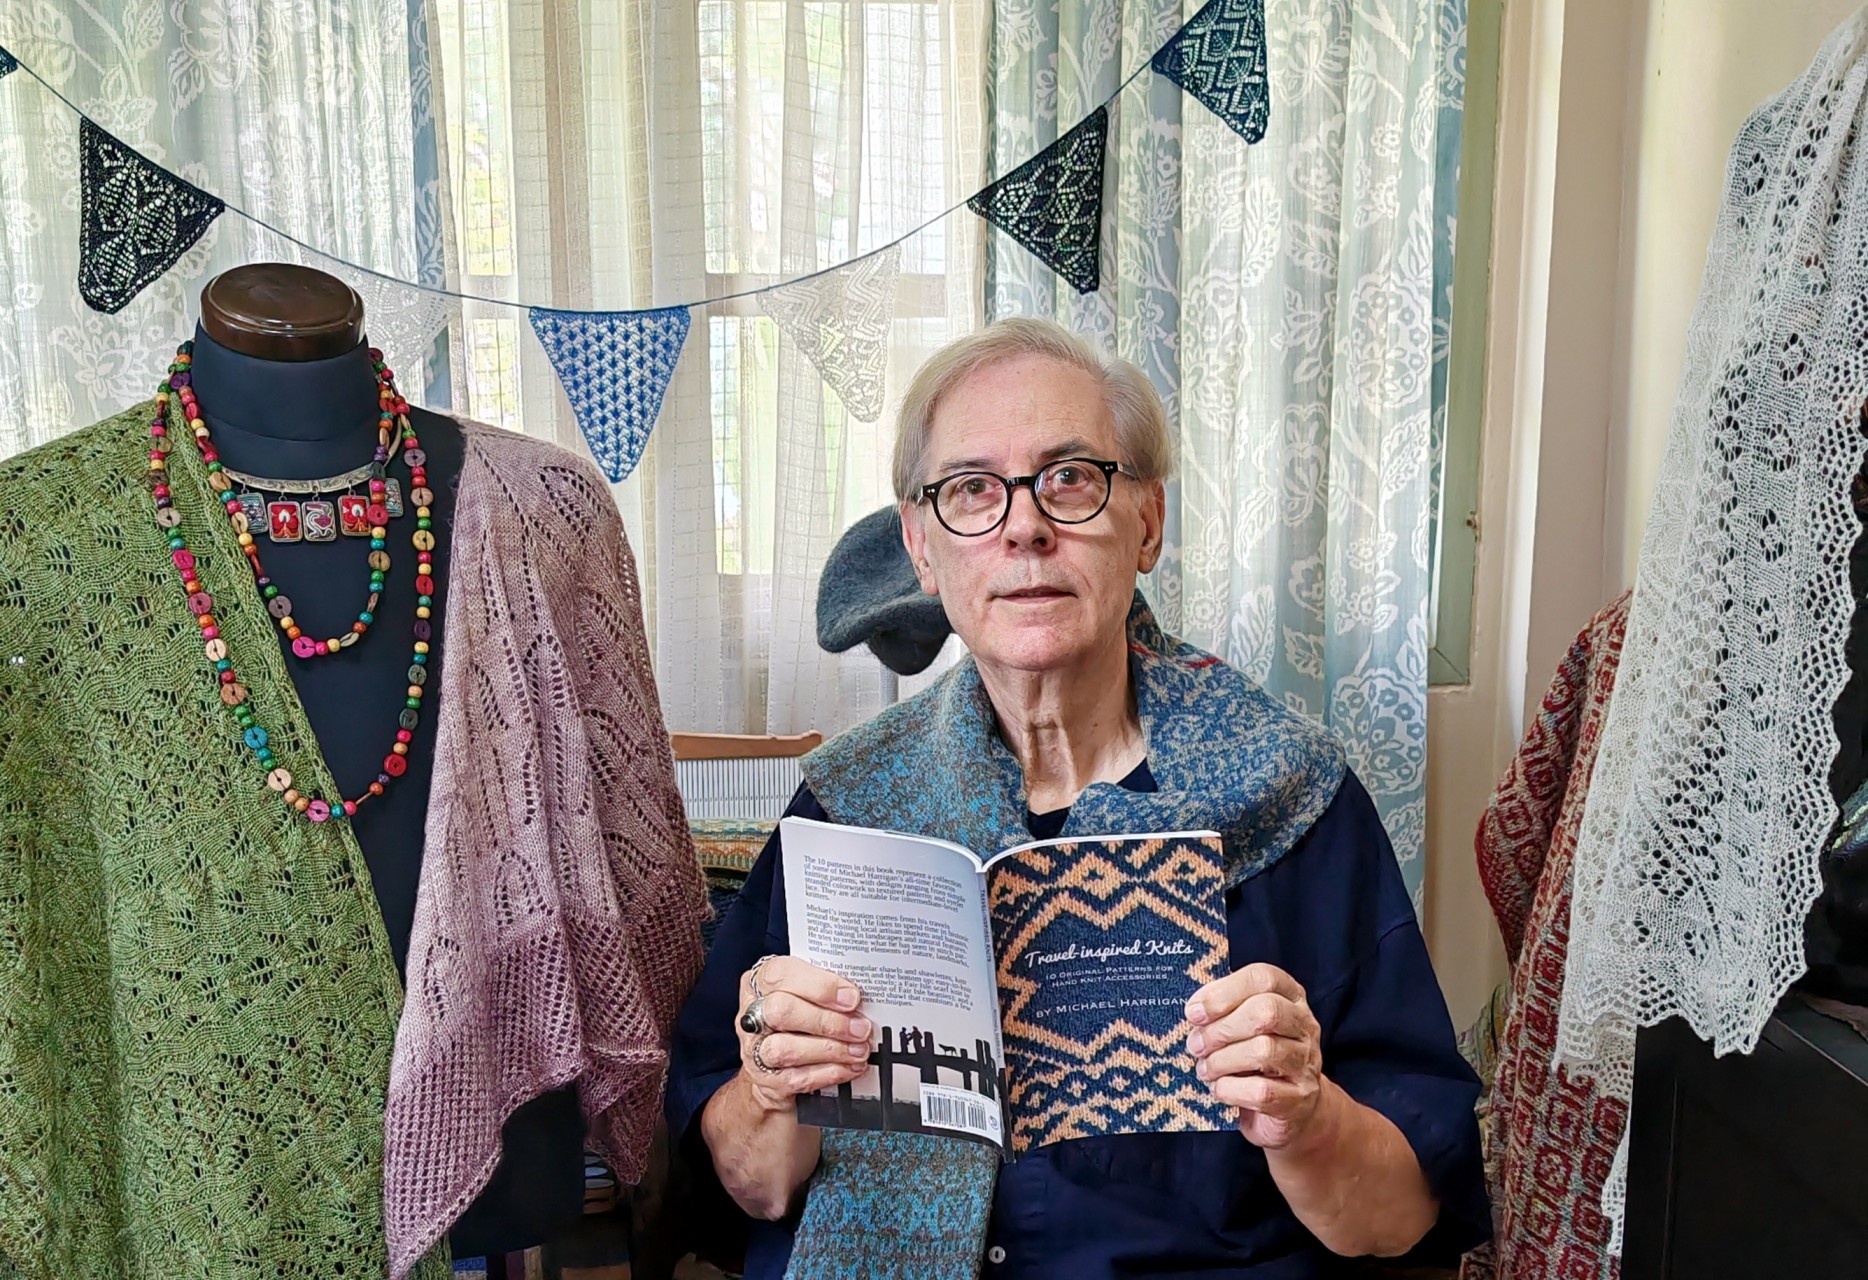 Michael Harrigan surrounded by knitwear and holding a book